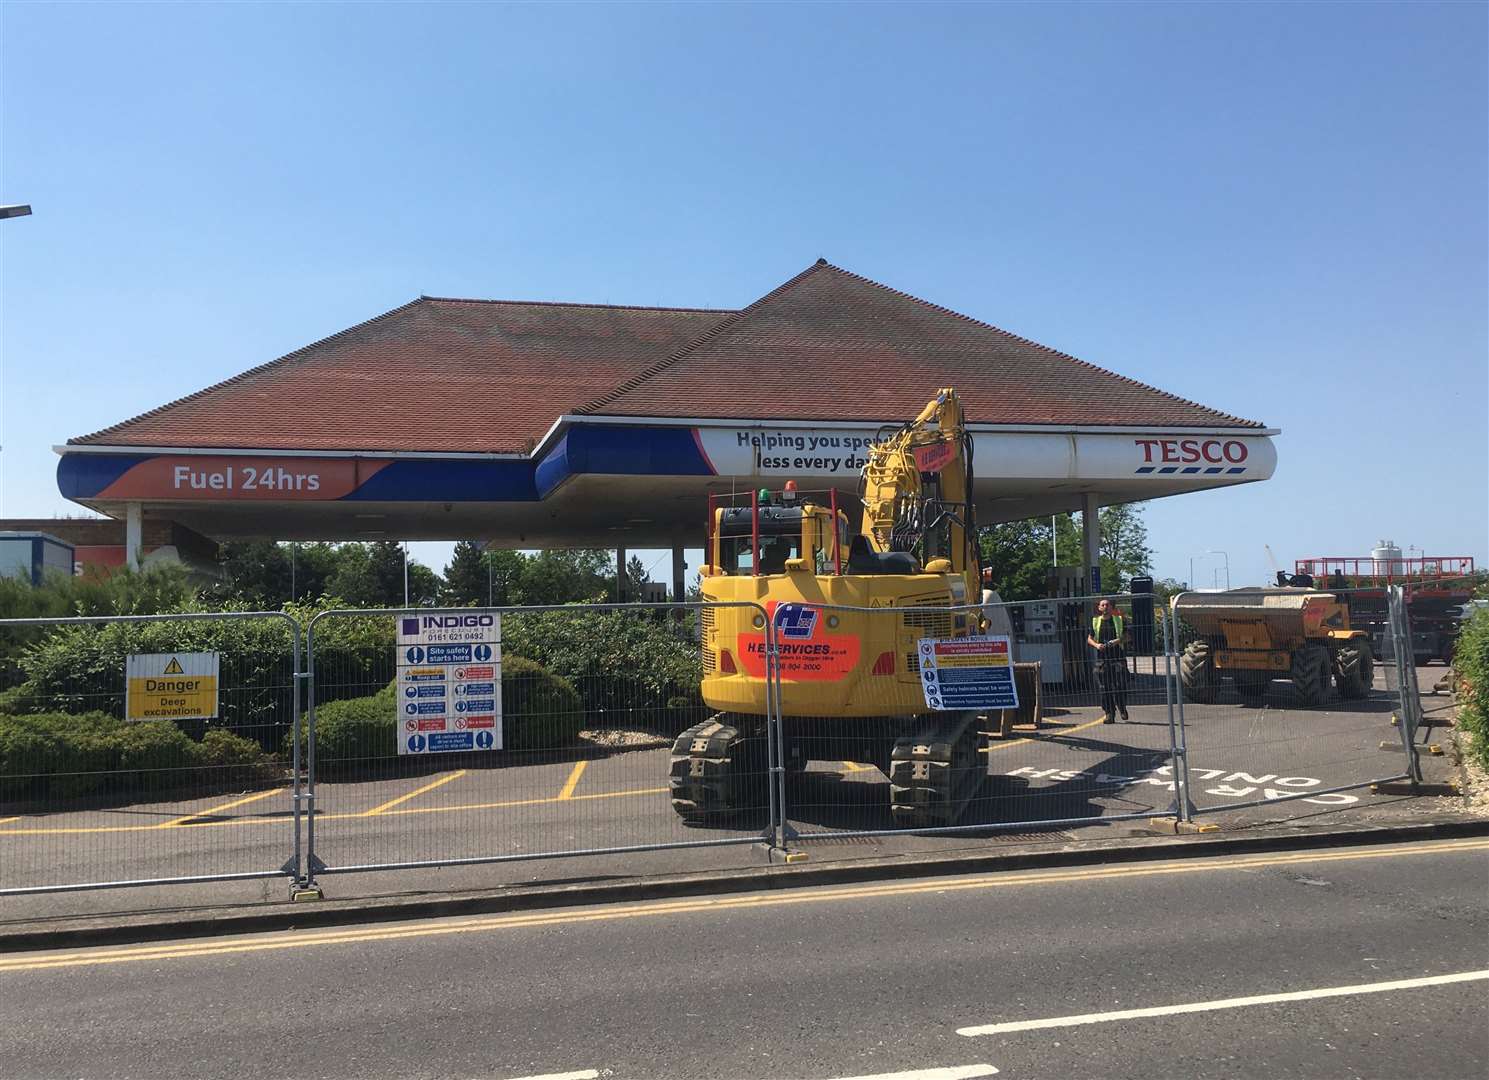 The forecourt of Tesco's petrol station is undergoing improvement work in Bridge Road, Sheerness